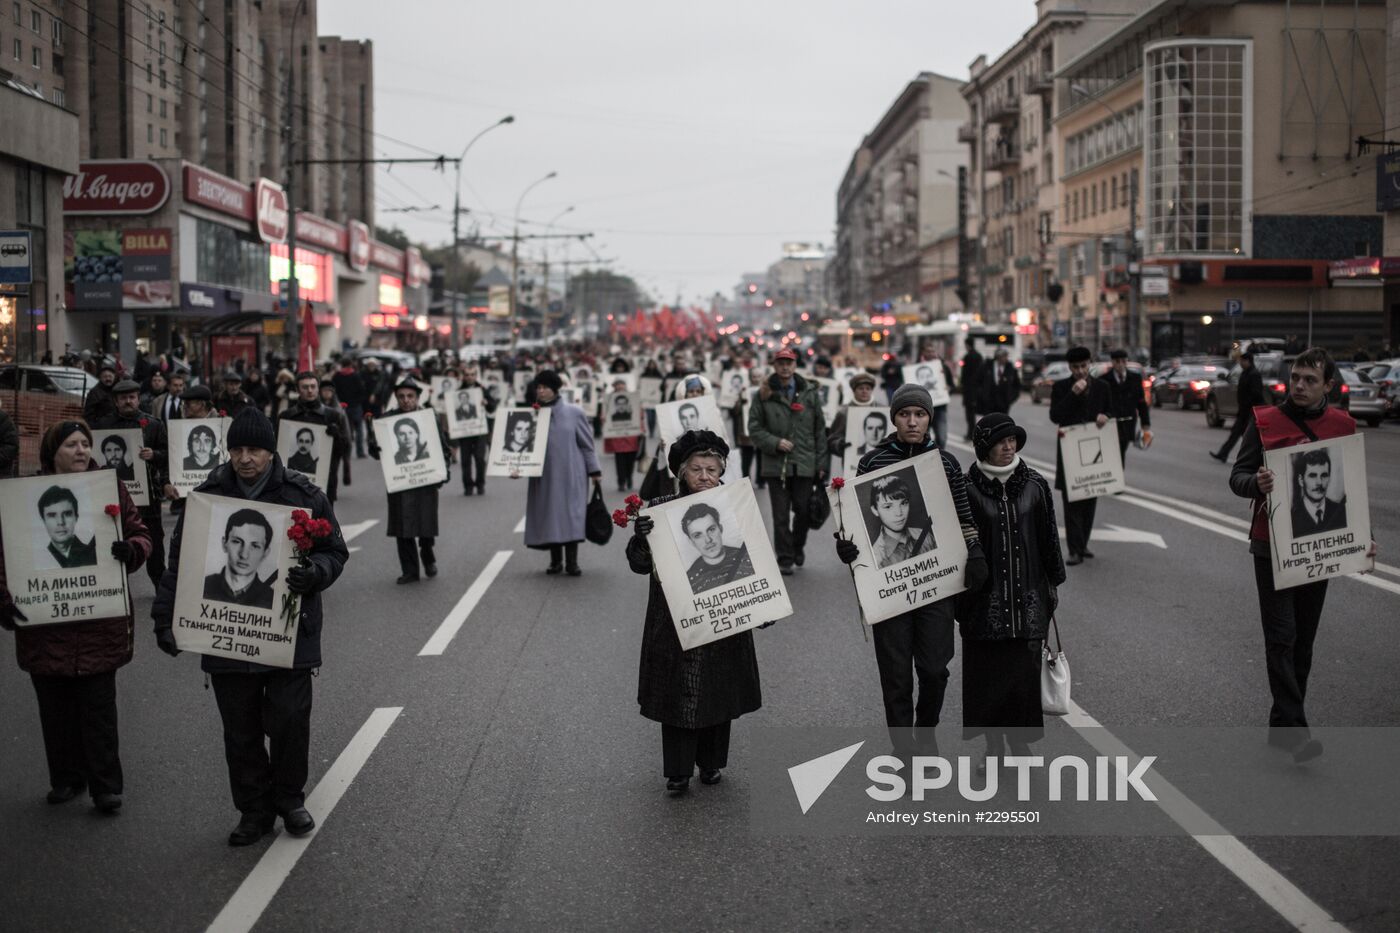 Procession dedicated to 20th anniversary of 1993 events in Moscow